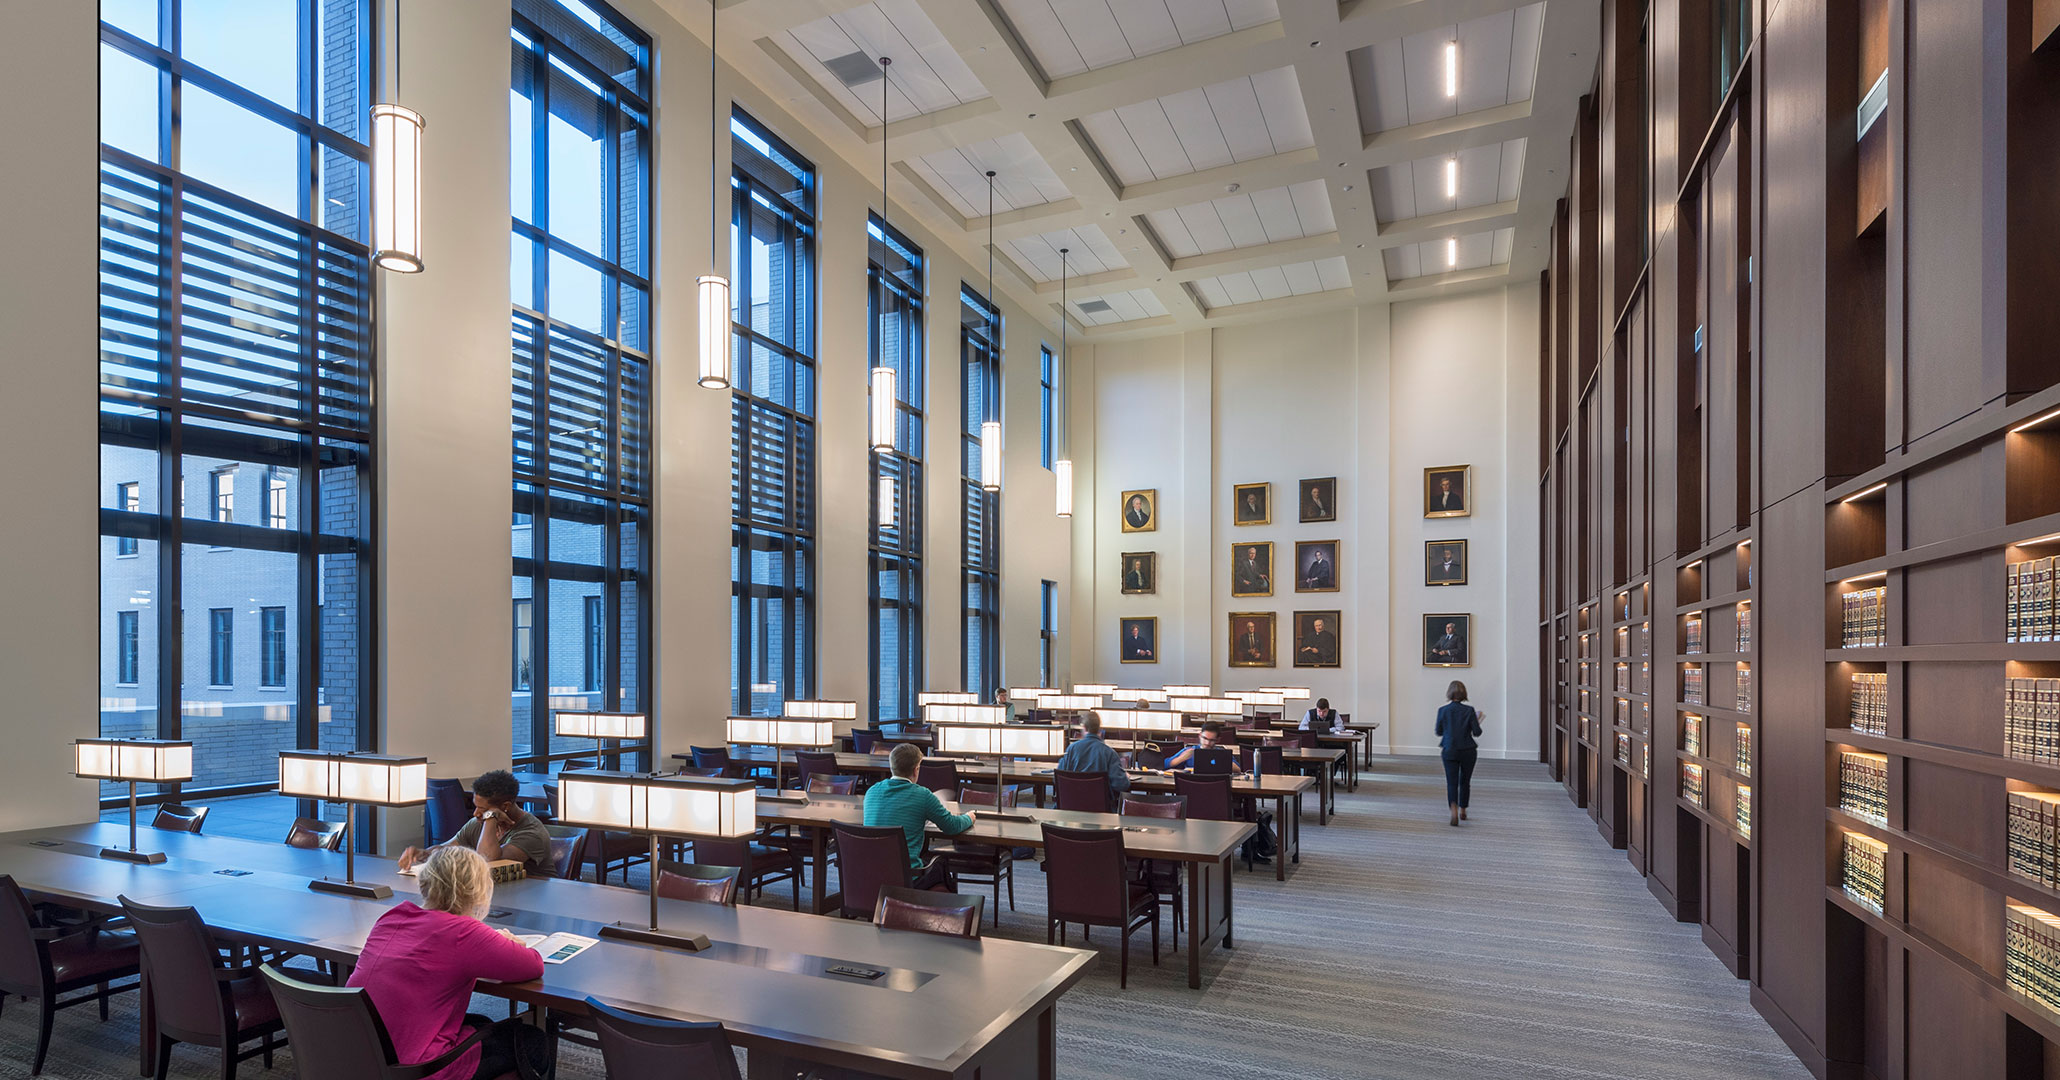 The University of South Carolina worked with Boudreaux architects to design a professional environment.